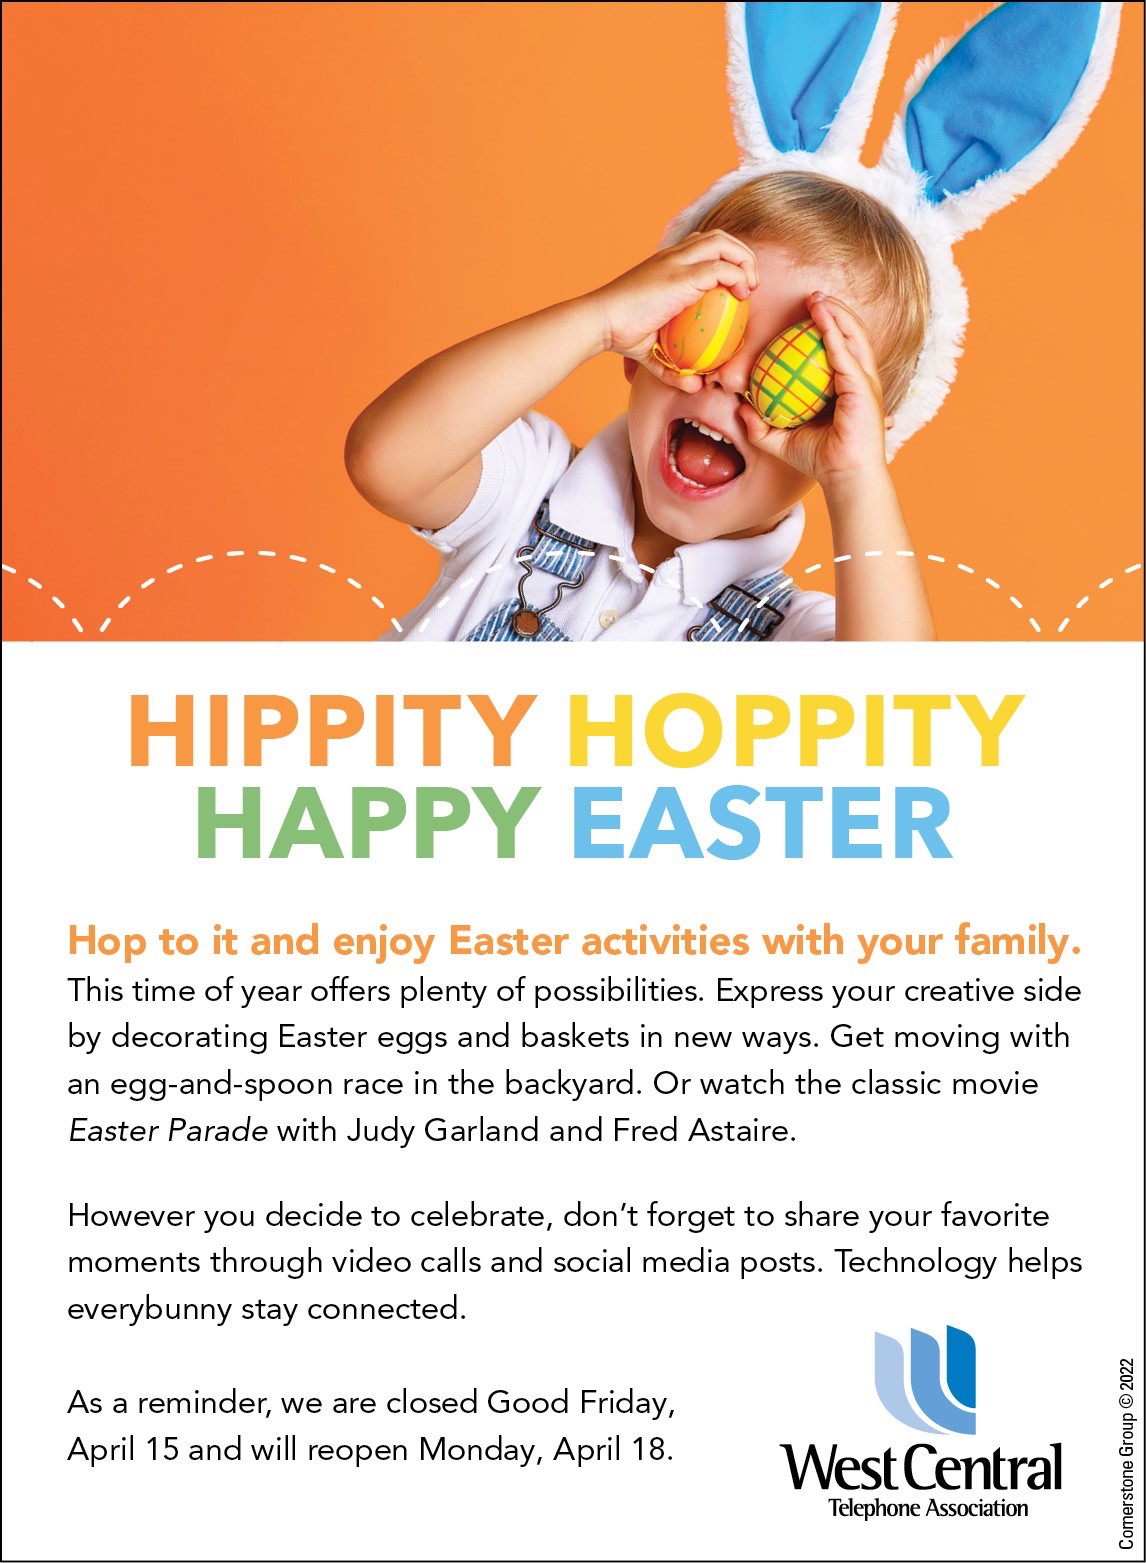 Hippity Hoppity Happy Easter - Download Graphics to View